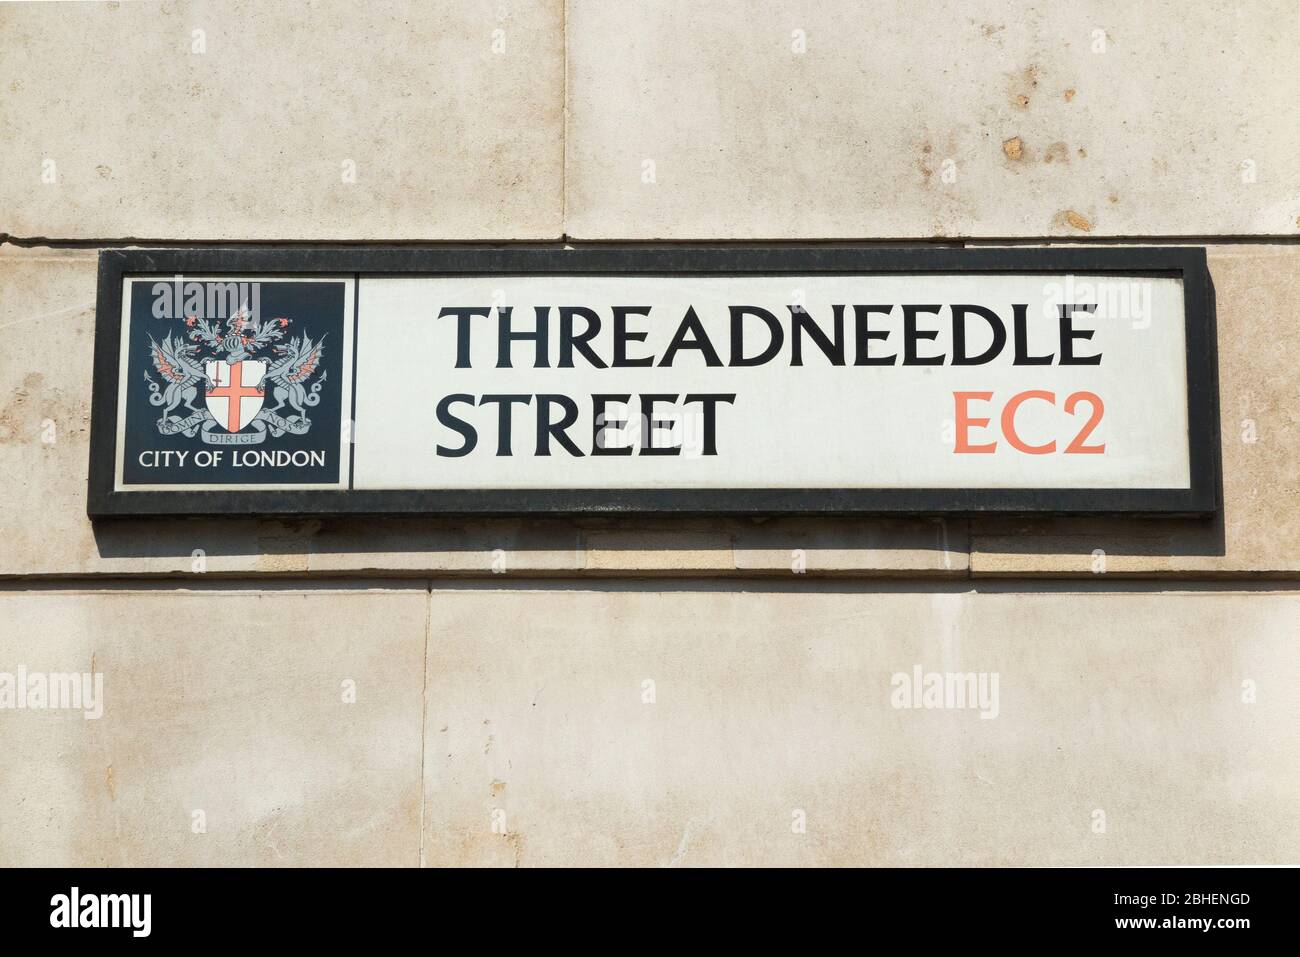 Threadneedle Street sign in the City of London, on the wall of the Bank of England. London EC2. London. UK. (118) Stock Photo